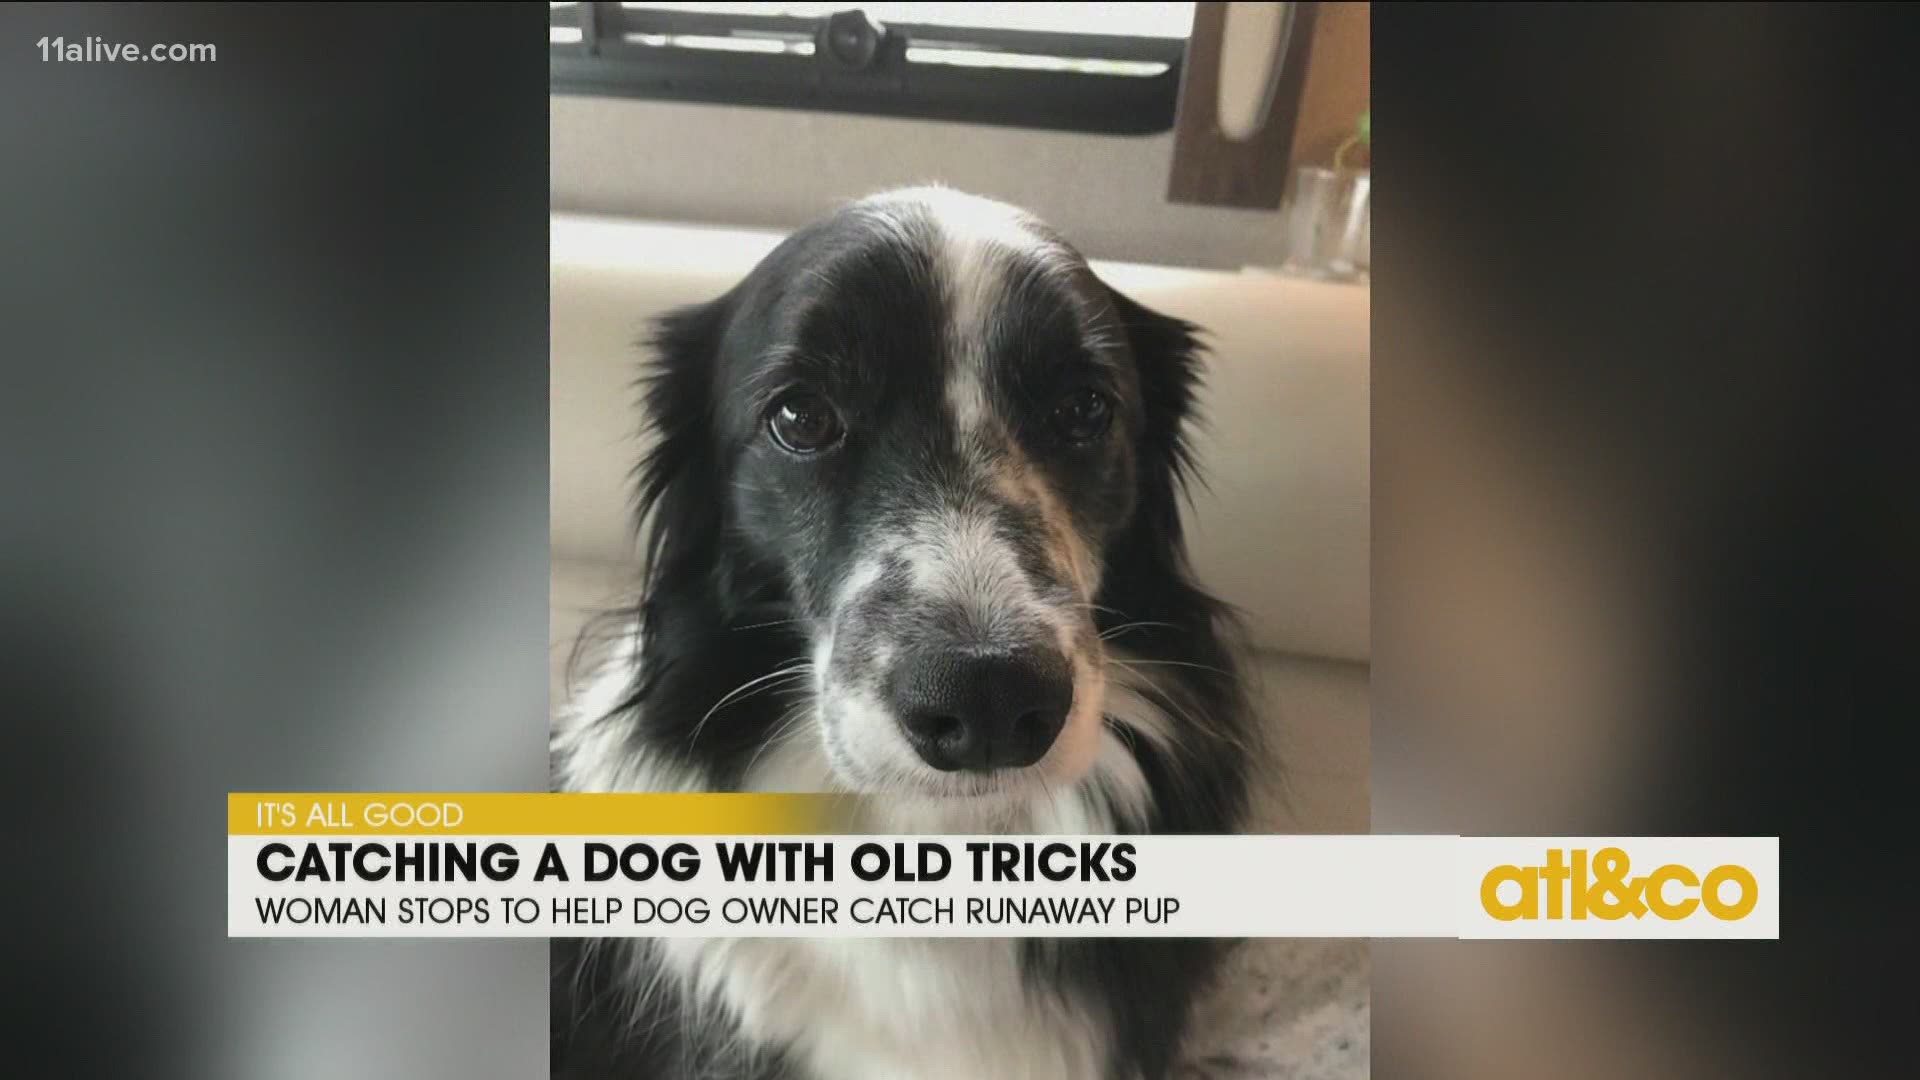 Cara Kneer shares a local viewer's sweet story about her runaway dog and the saving grace of saltines!